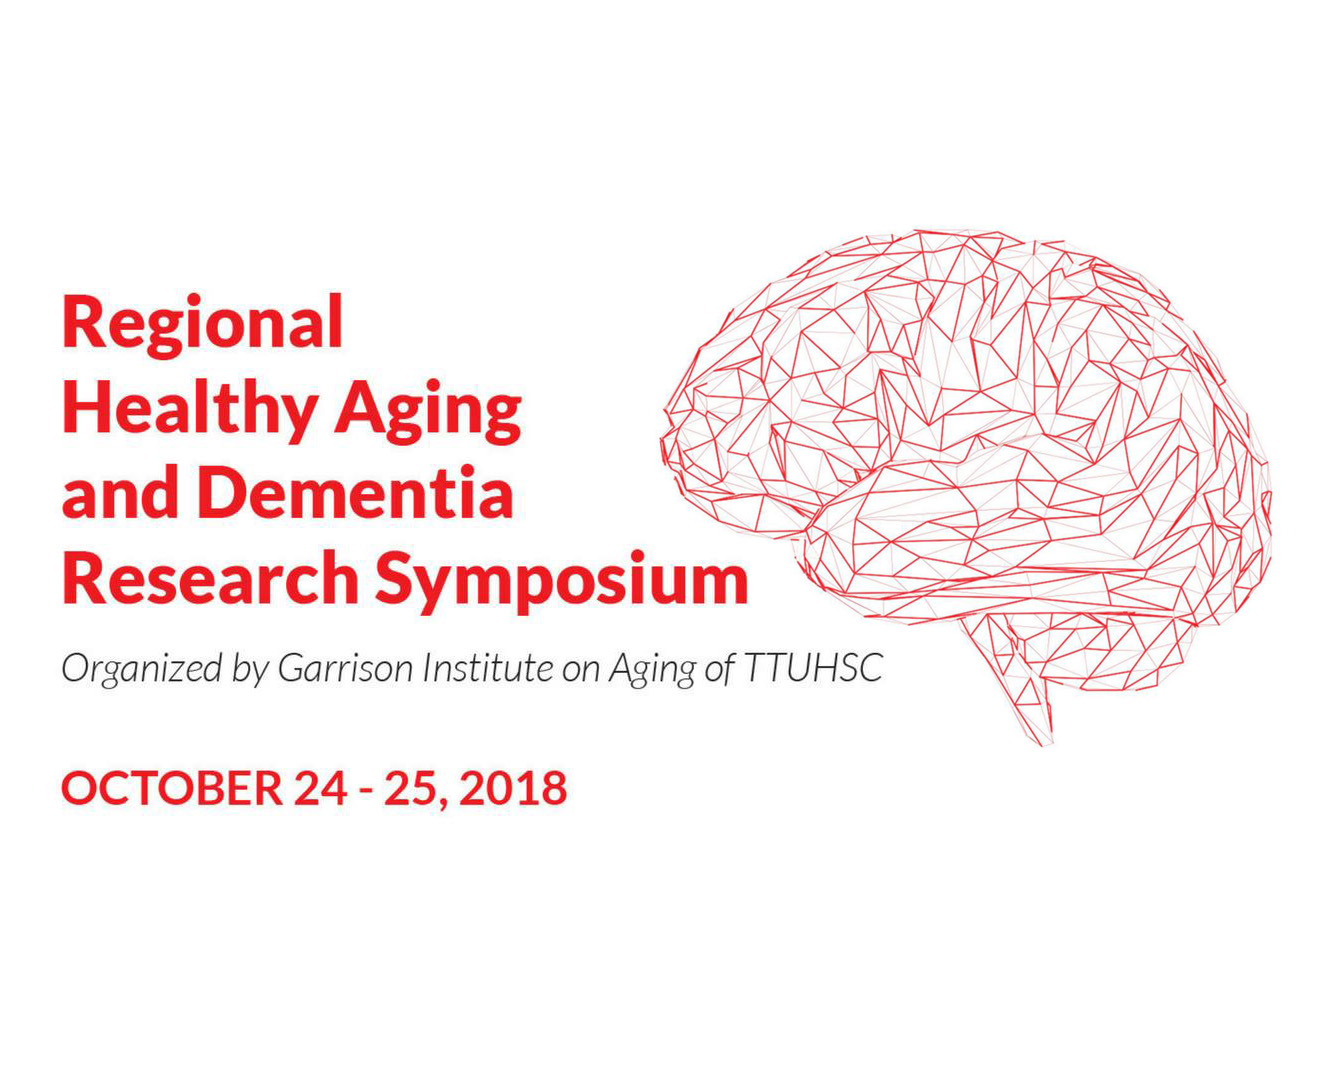 Garrison Institute on Aging to Host Regional Healthy Aging And Dementia Research Symposium  